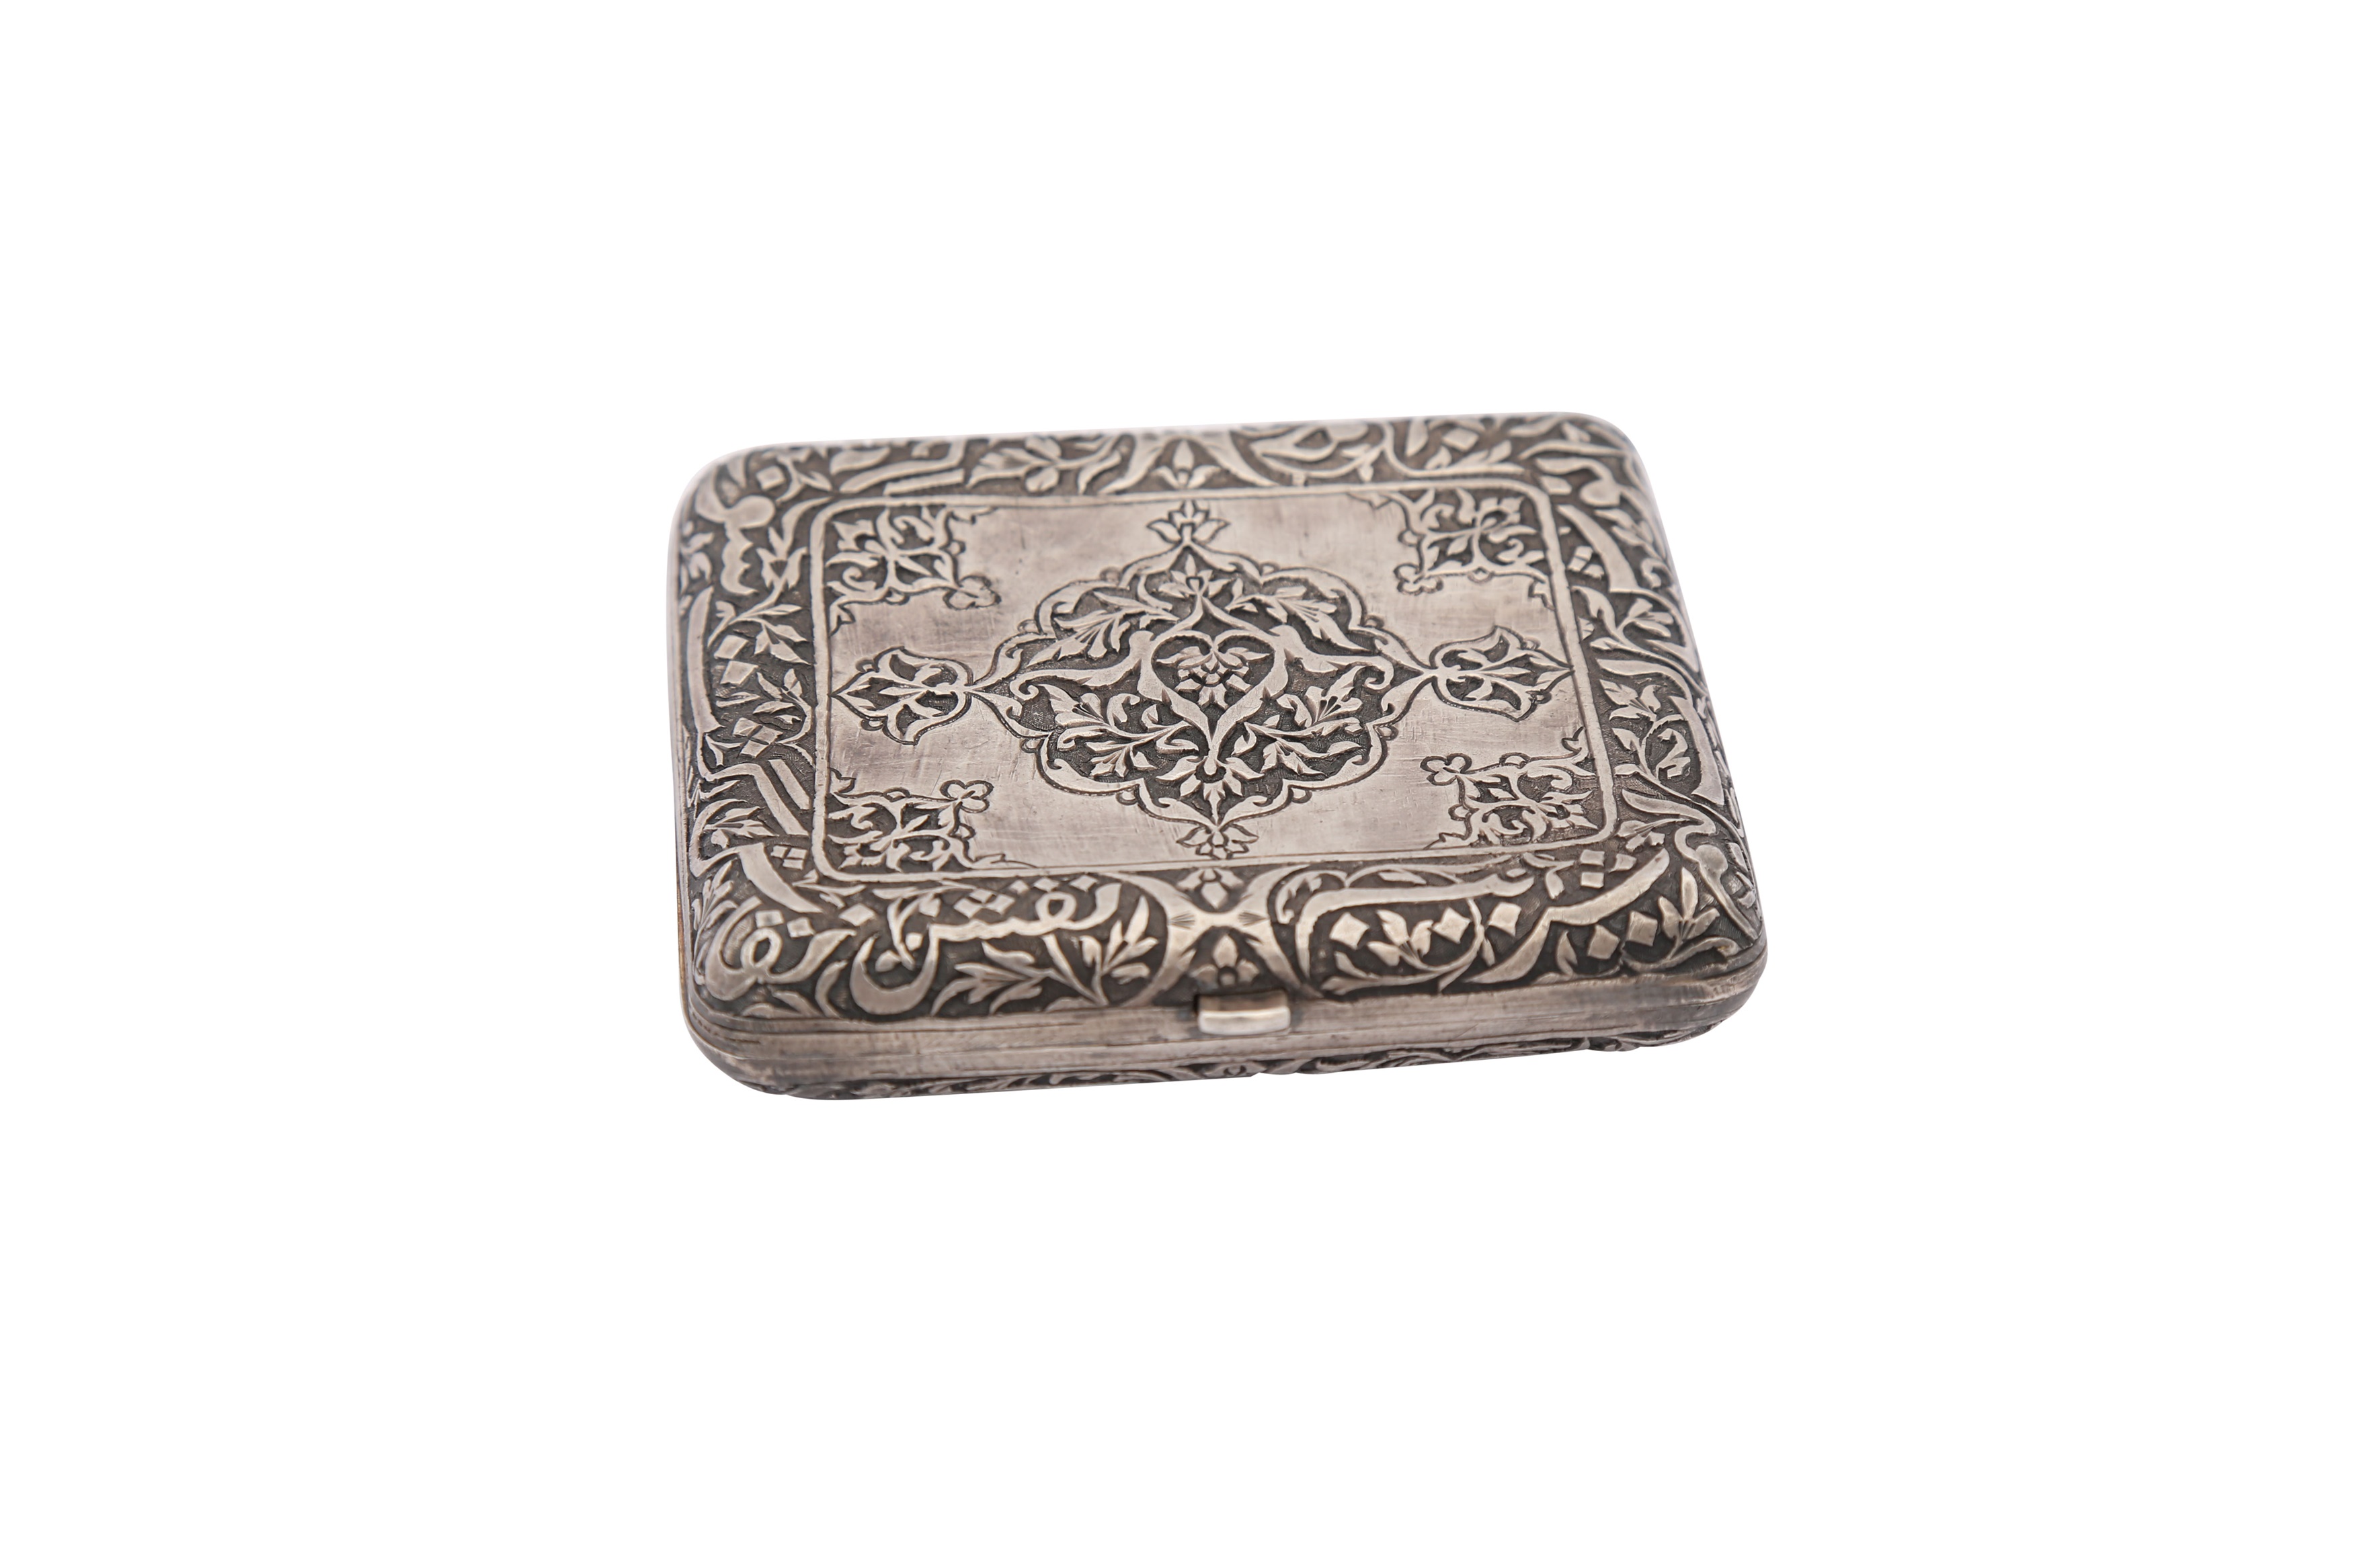 A KASHMIRI PARCEL-GILT AND ENGRAVED SILVER BOX - Image 5 of 5